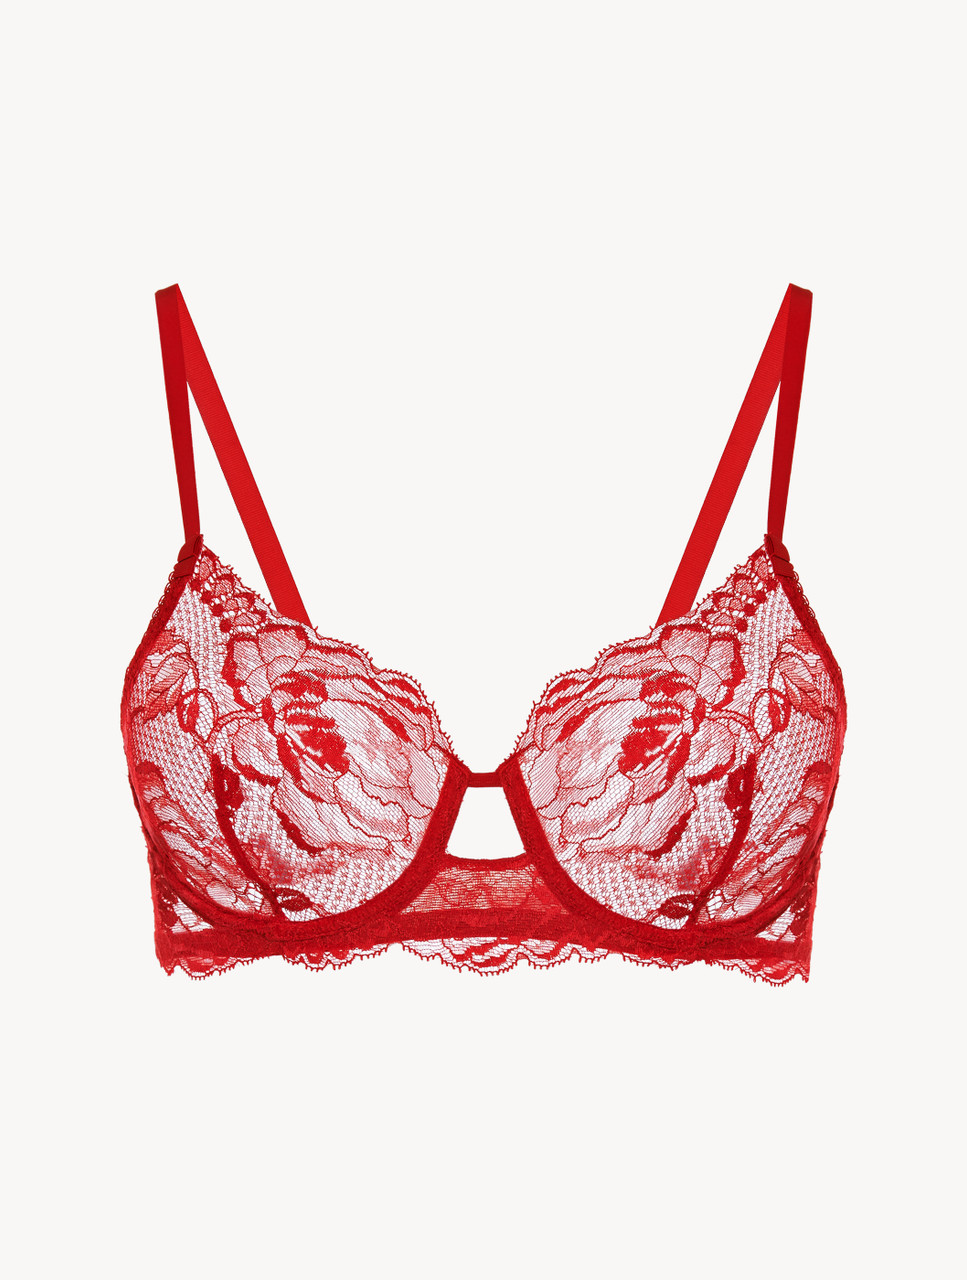 Red lace underwired bra